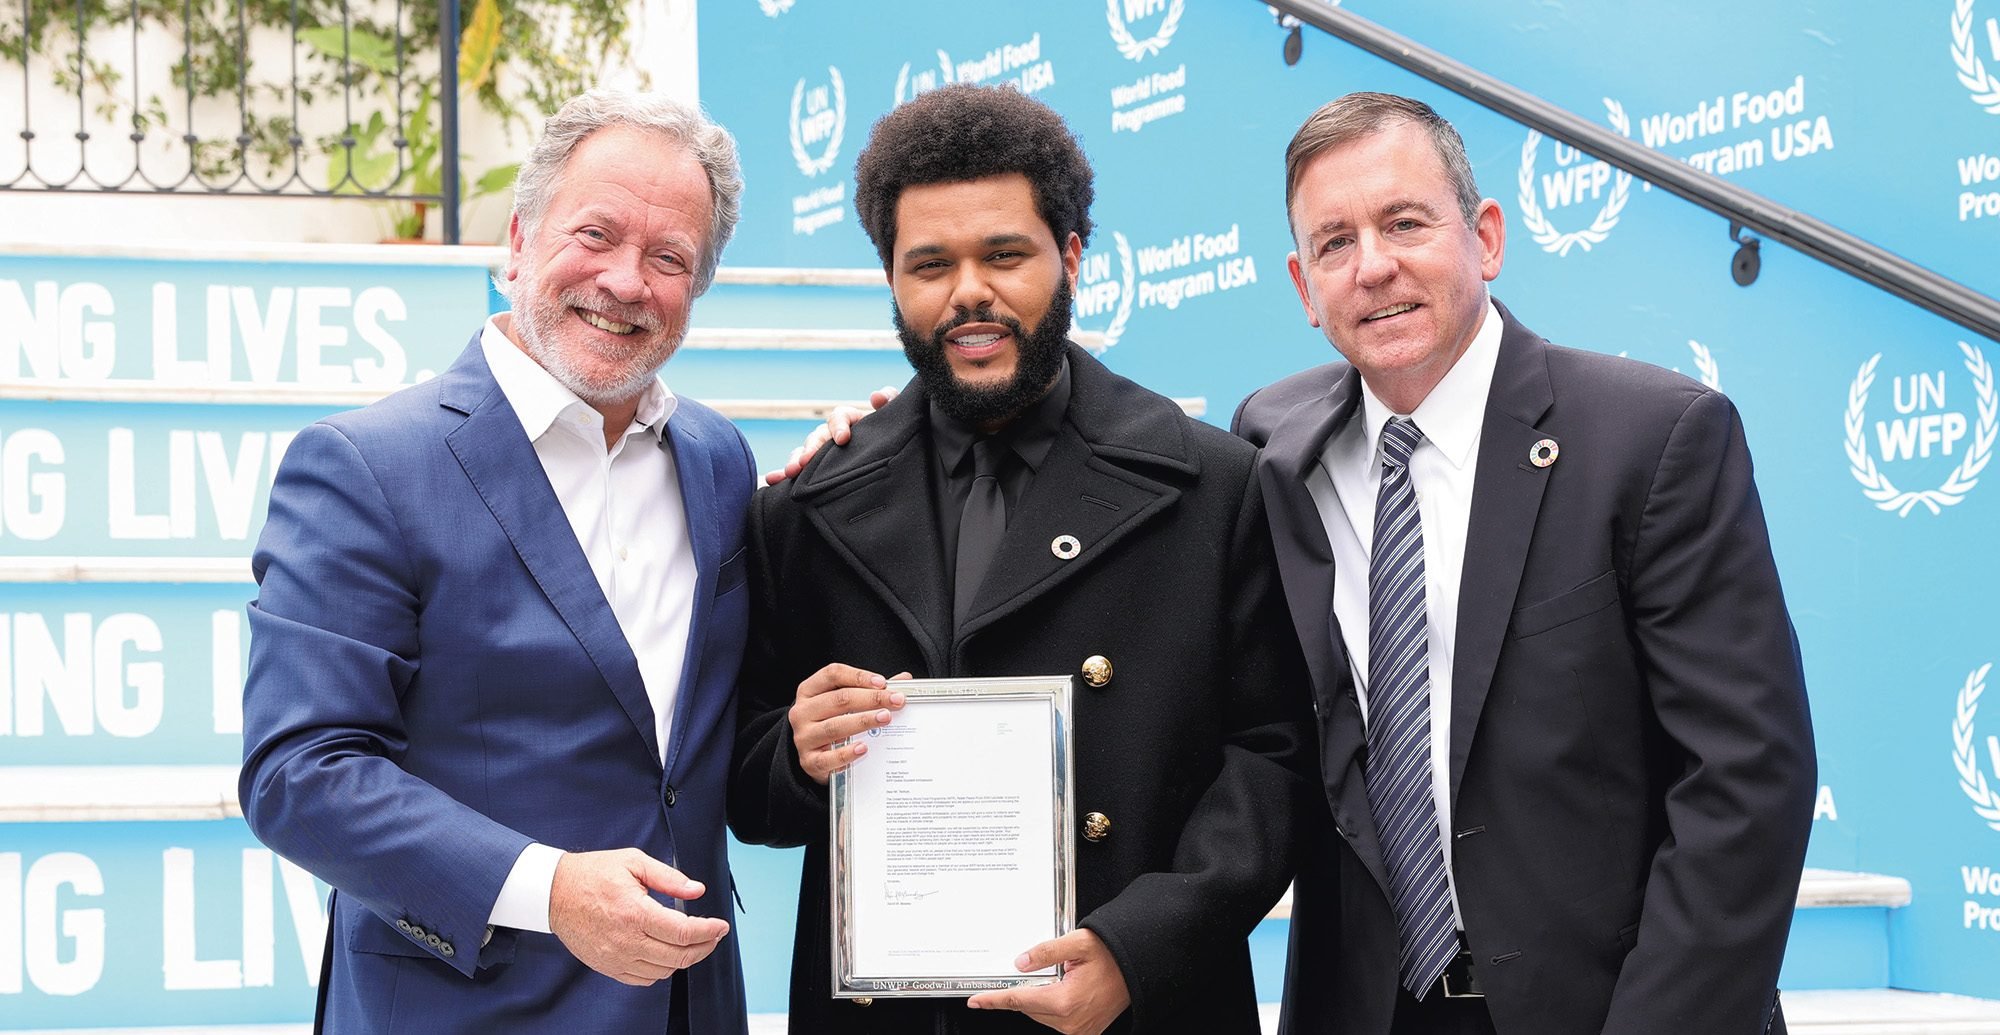 WFP Goodwill Ambassador The Weeknd raises US$5 million to fight global hunger